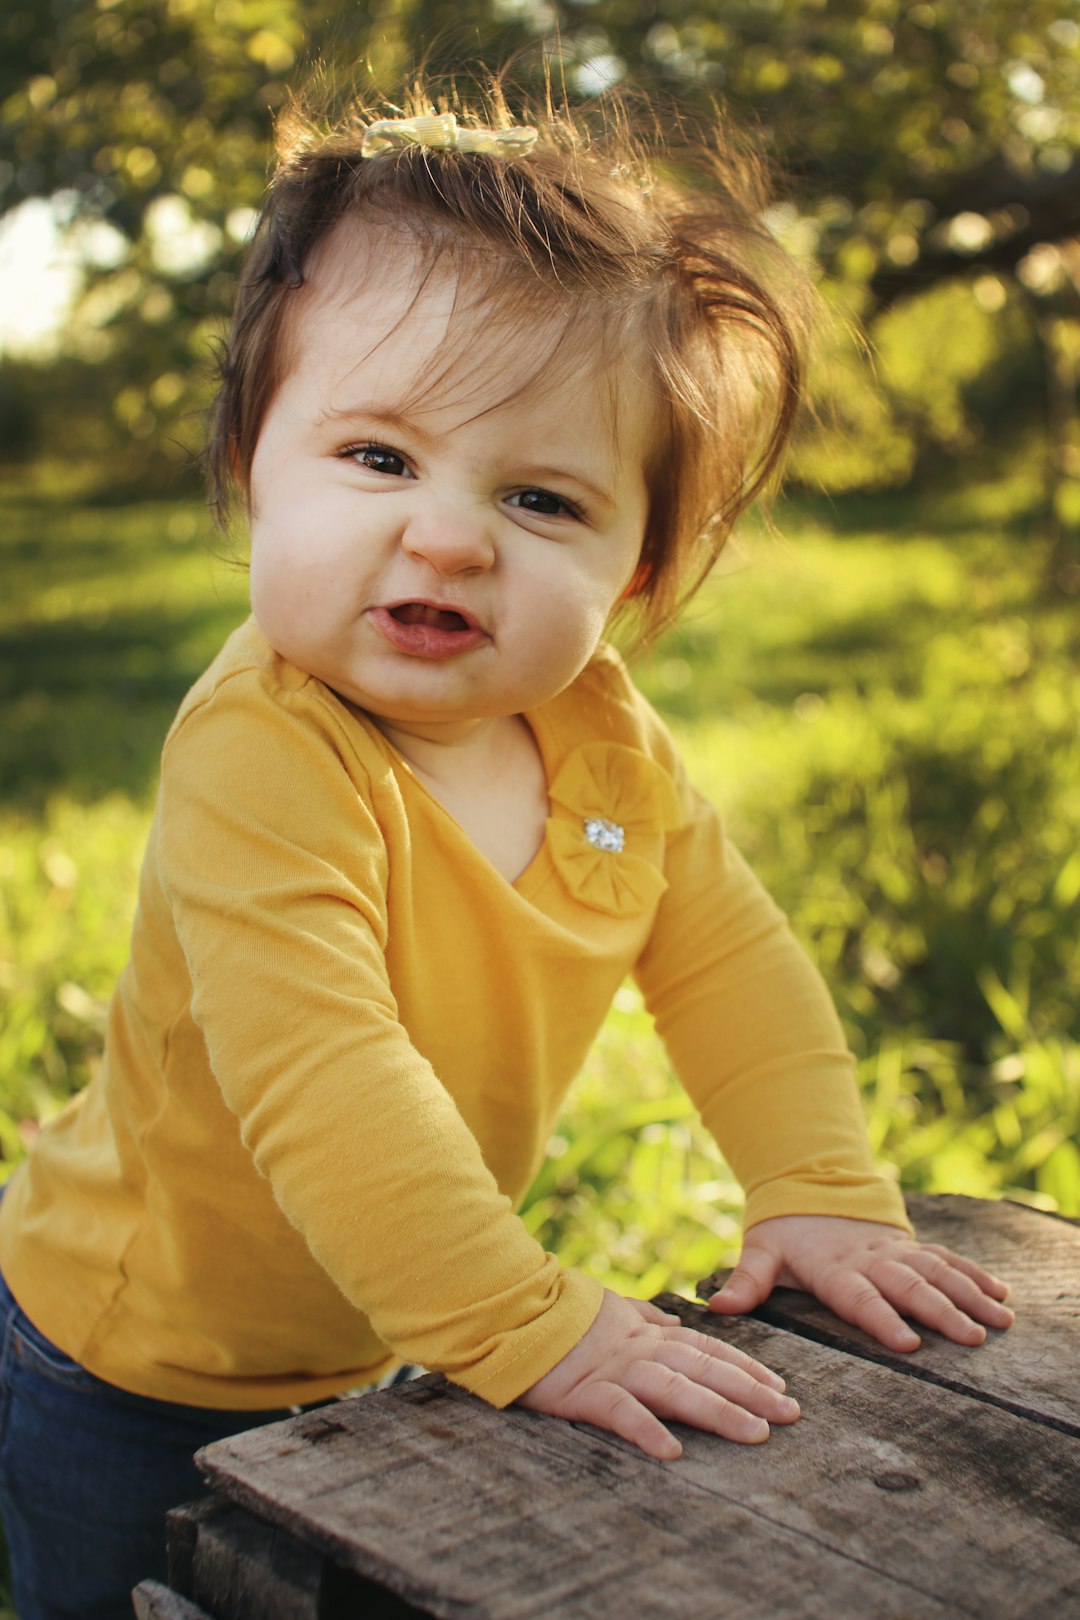 Young toddler girl wearing yellow shirt with red hair standing against a wooden crate in apple orchard at golden hour.